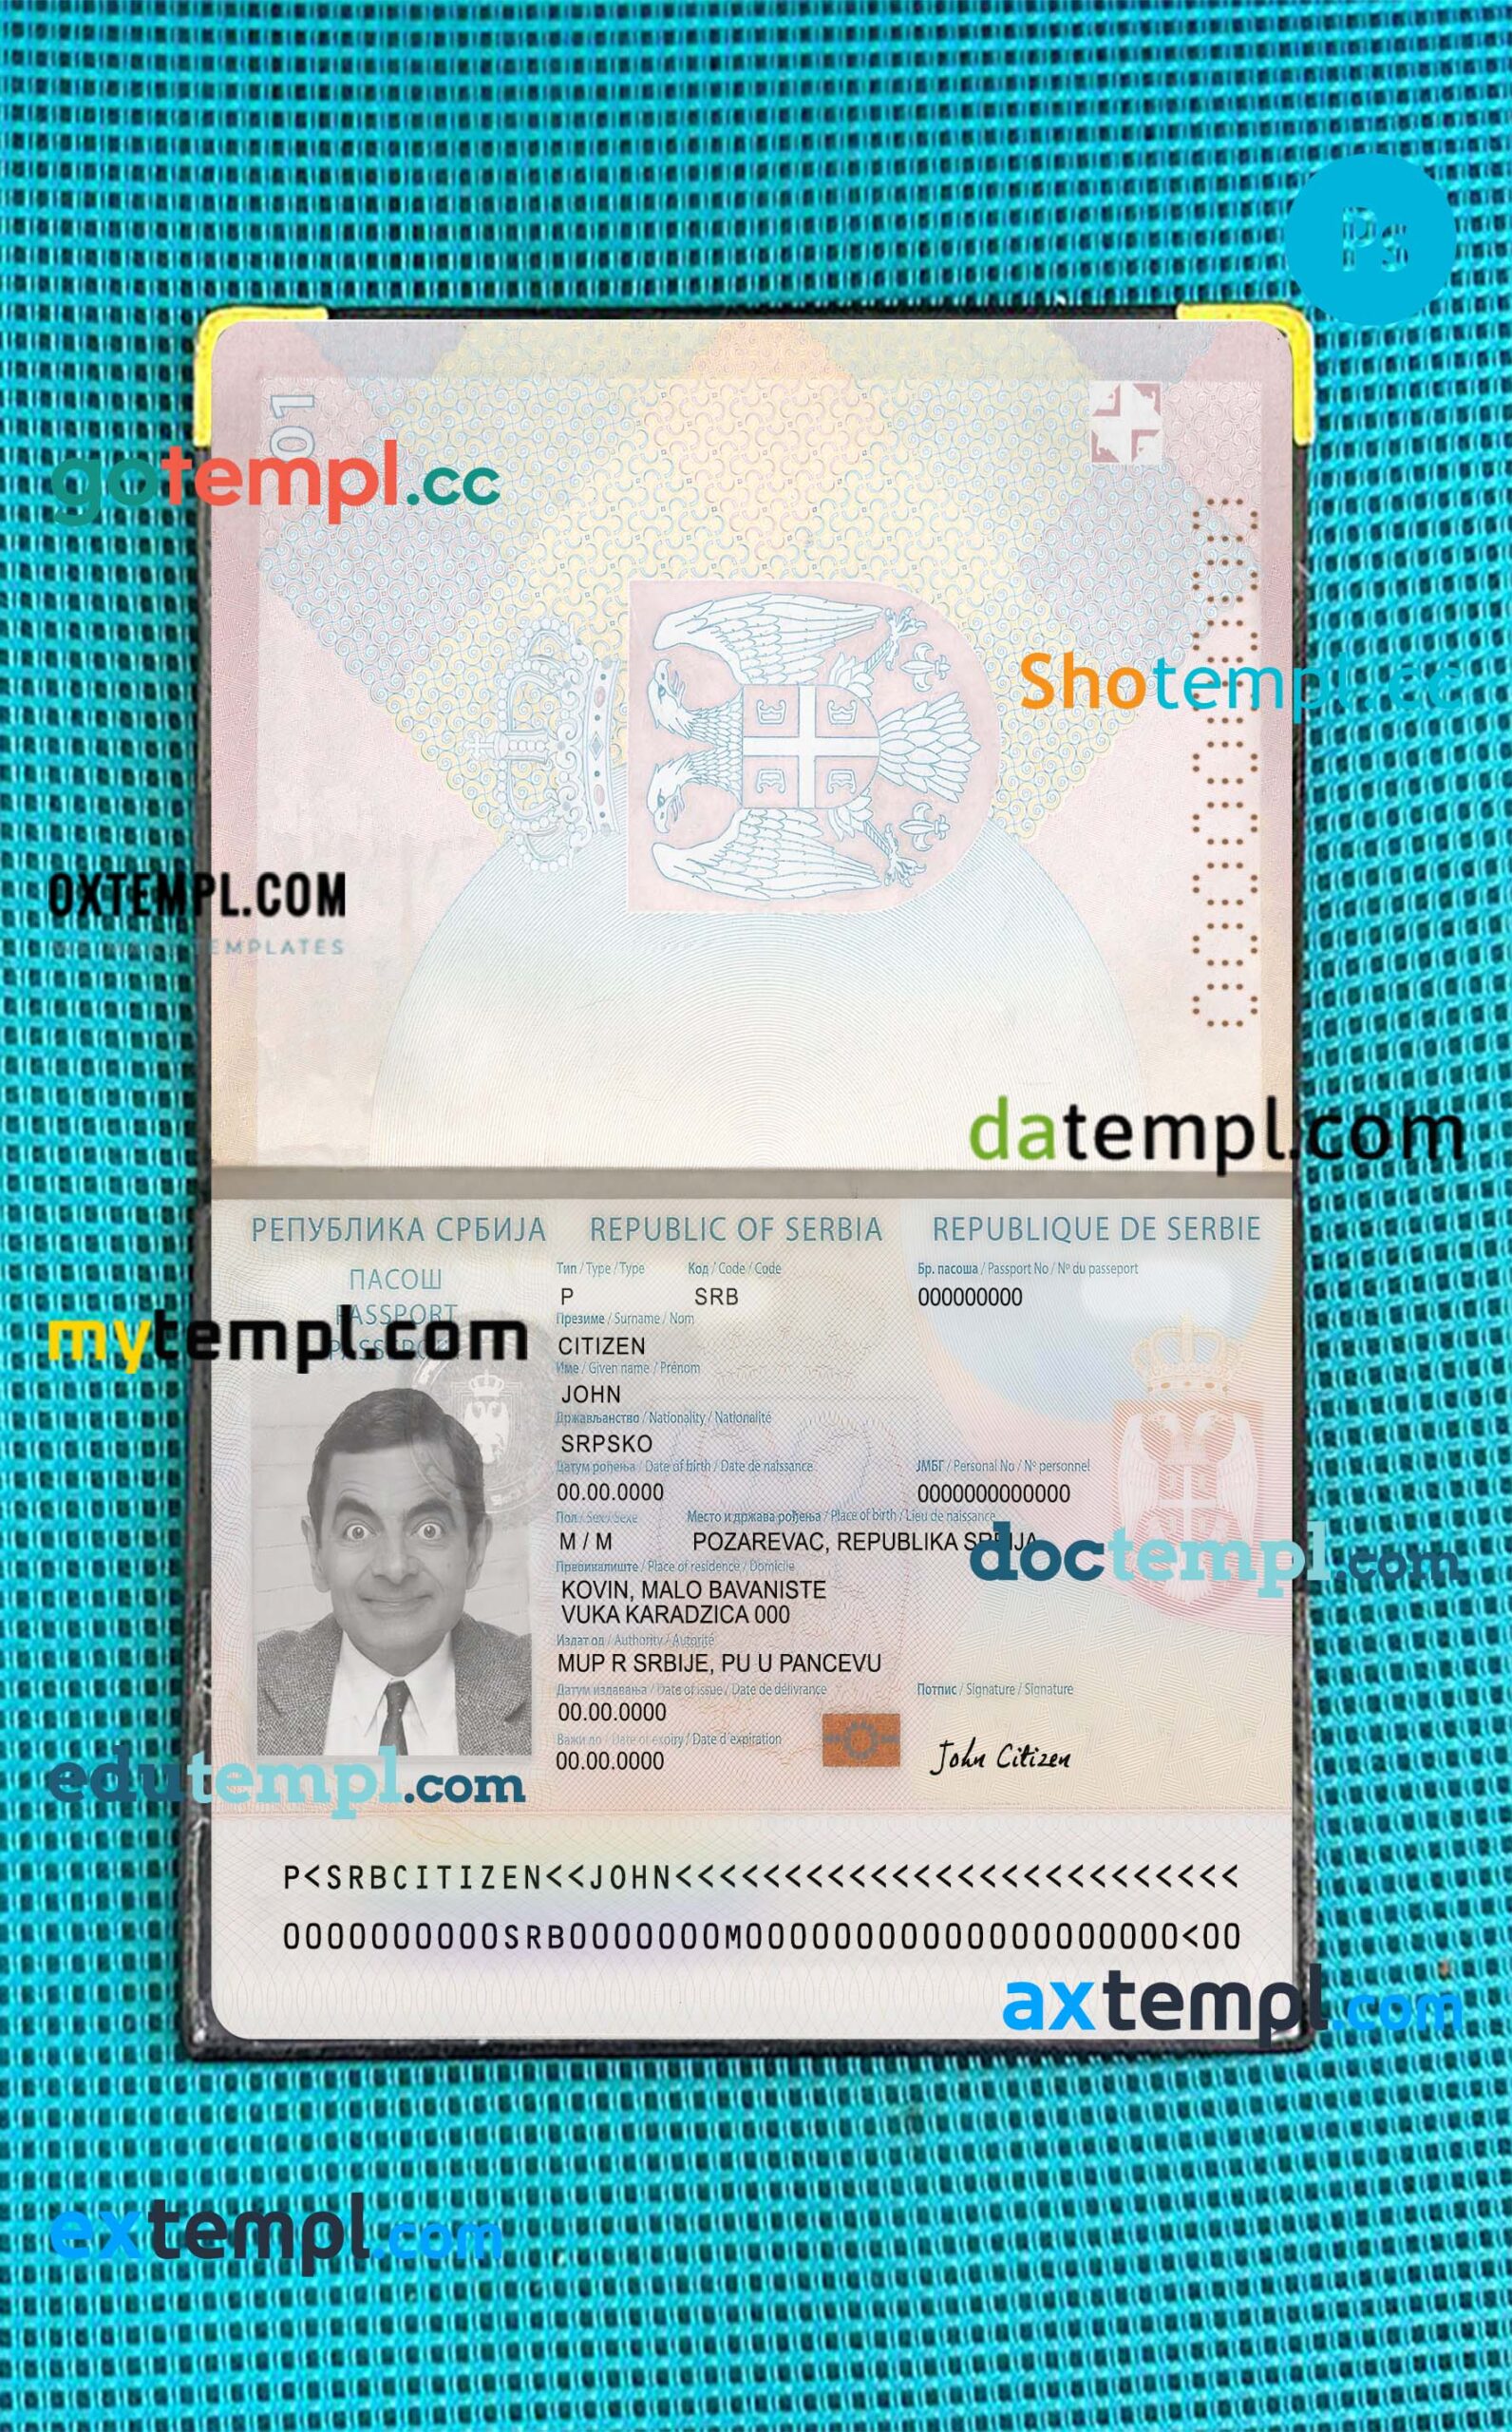 Serbia passport editable PSD files, scan and photo taken image (2018-present), 2 in 1